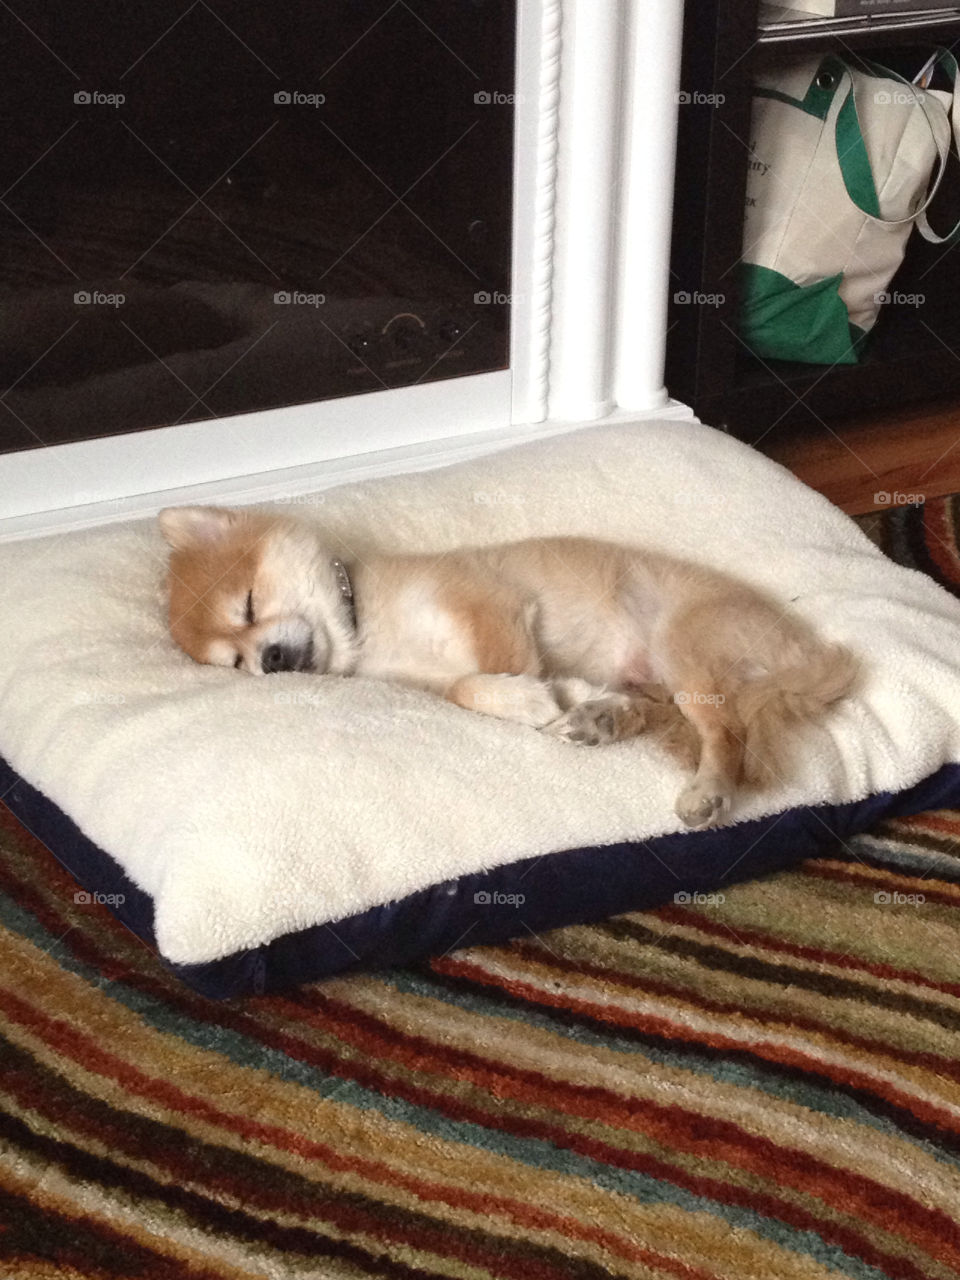 Mister, a 10 year old pomeranian, is worn out after doggy daycare!